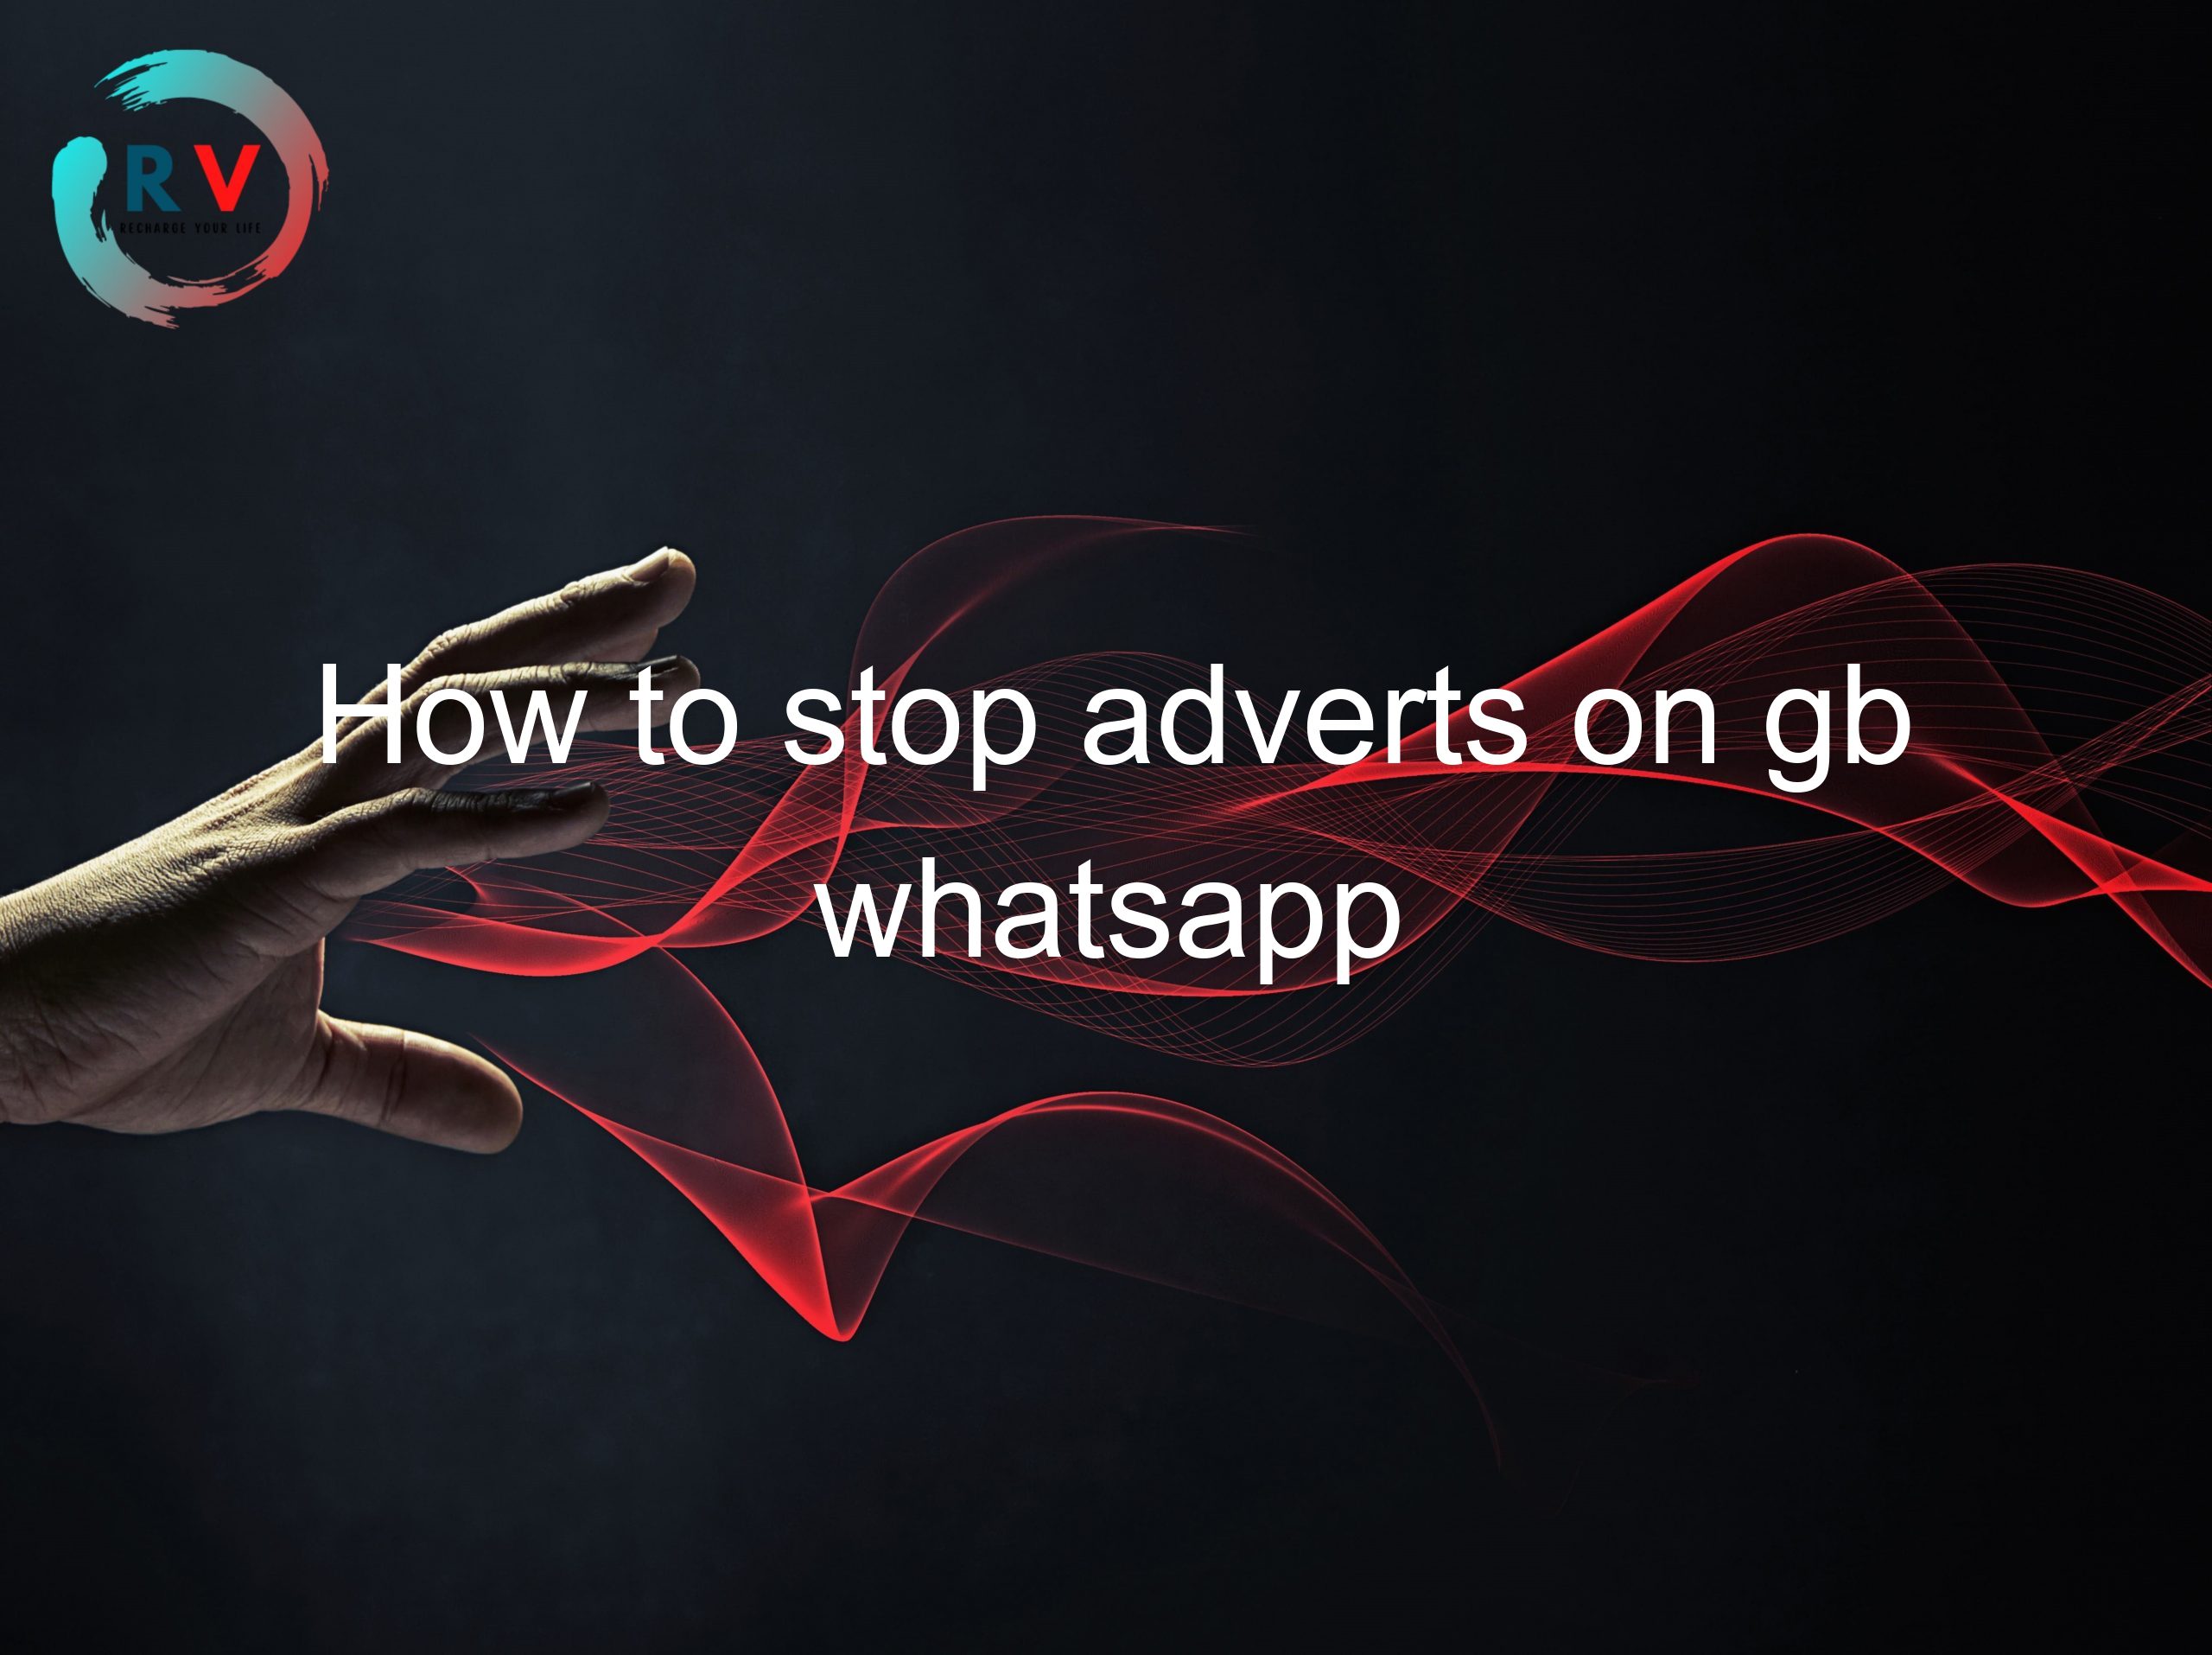 How to stop adverts on gb whatsapp